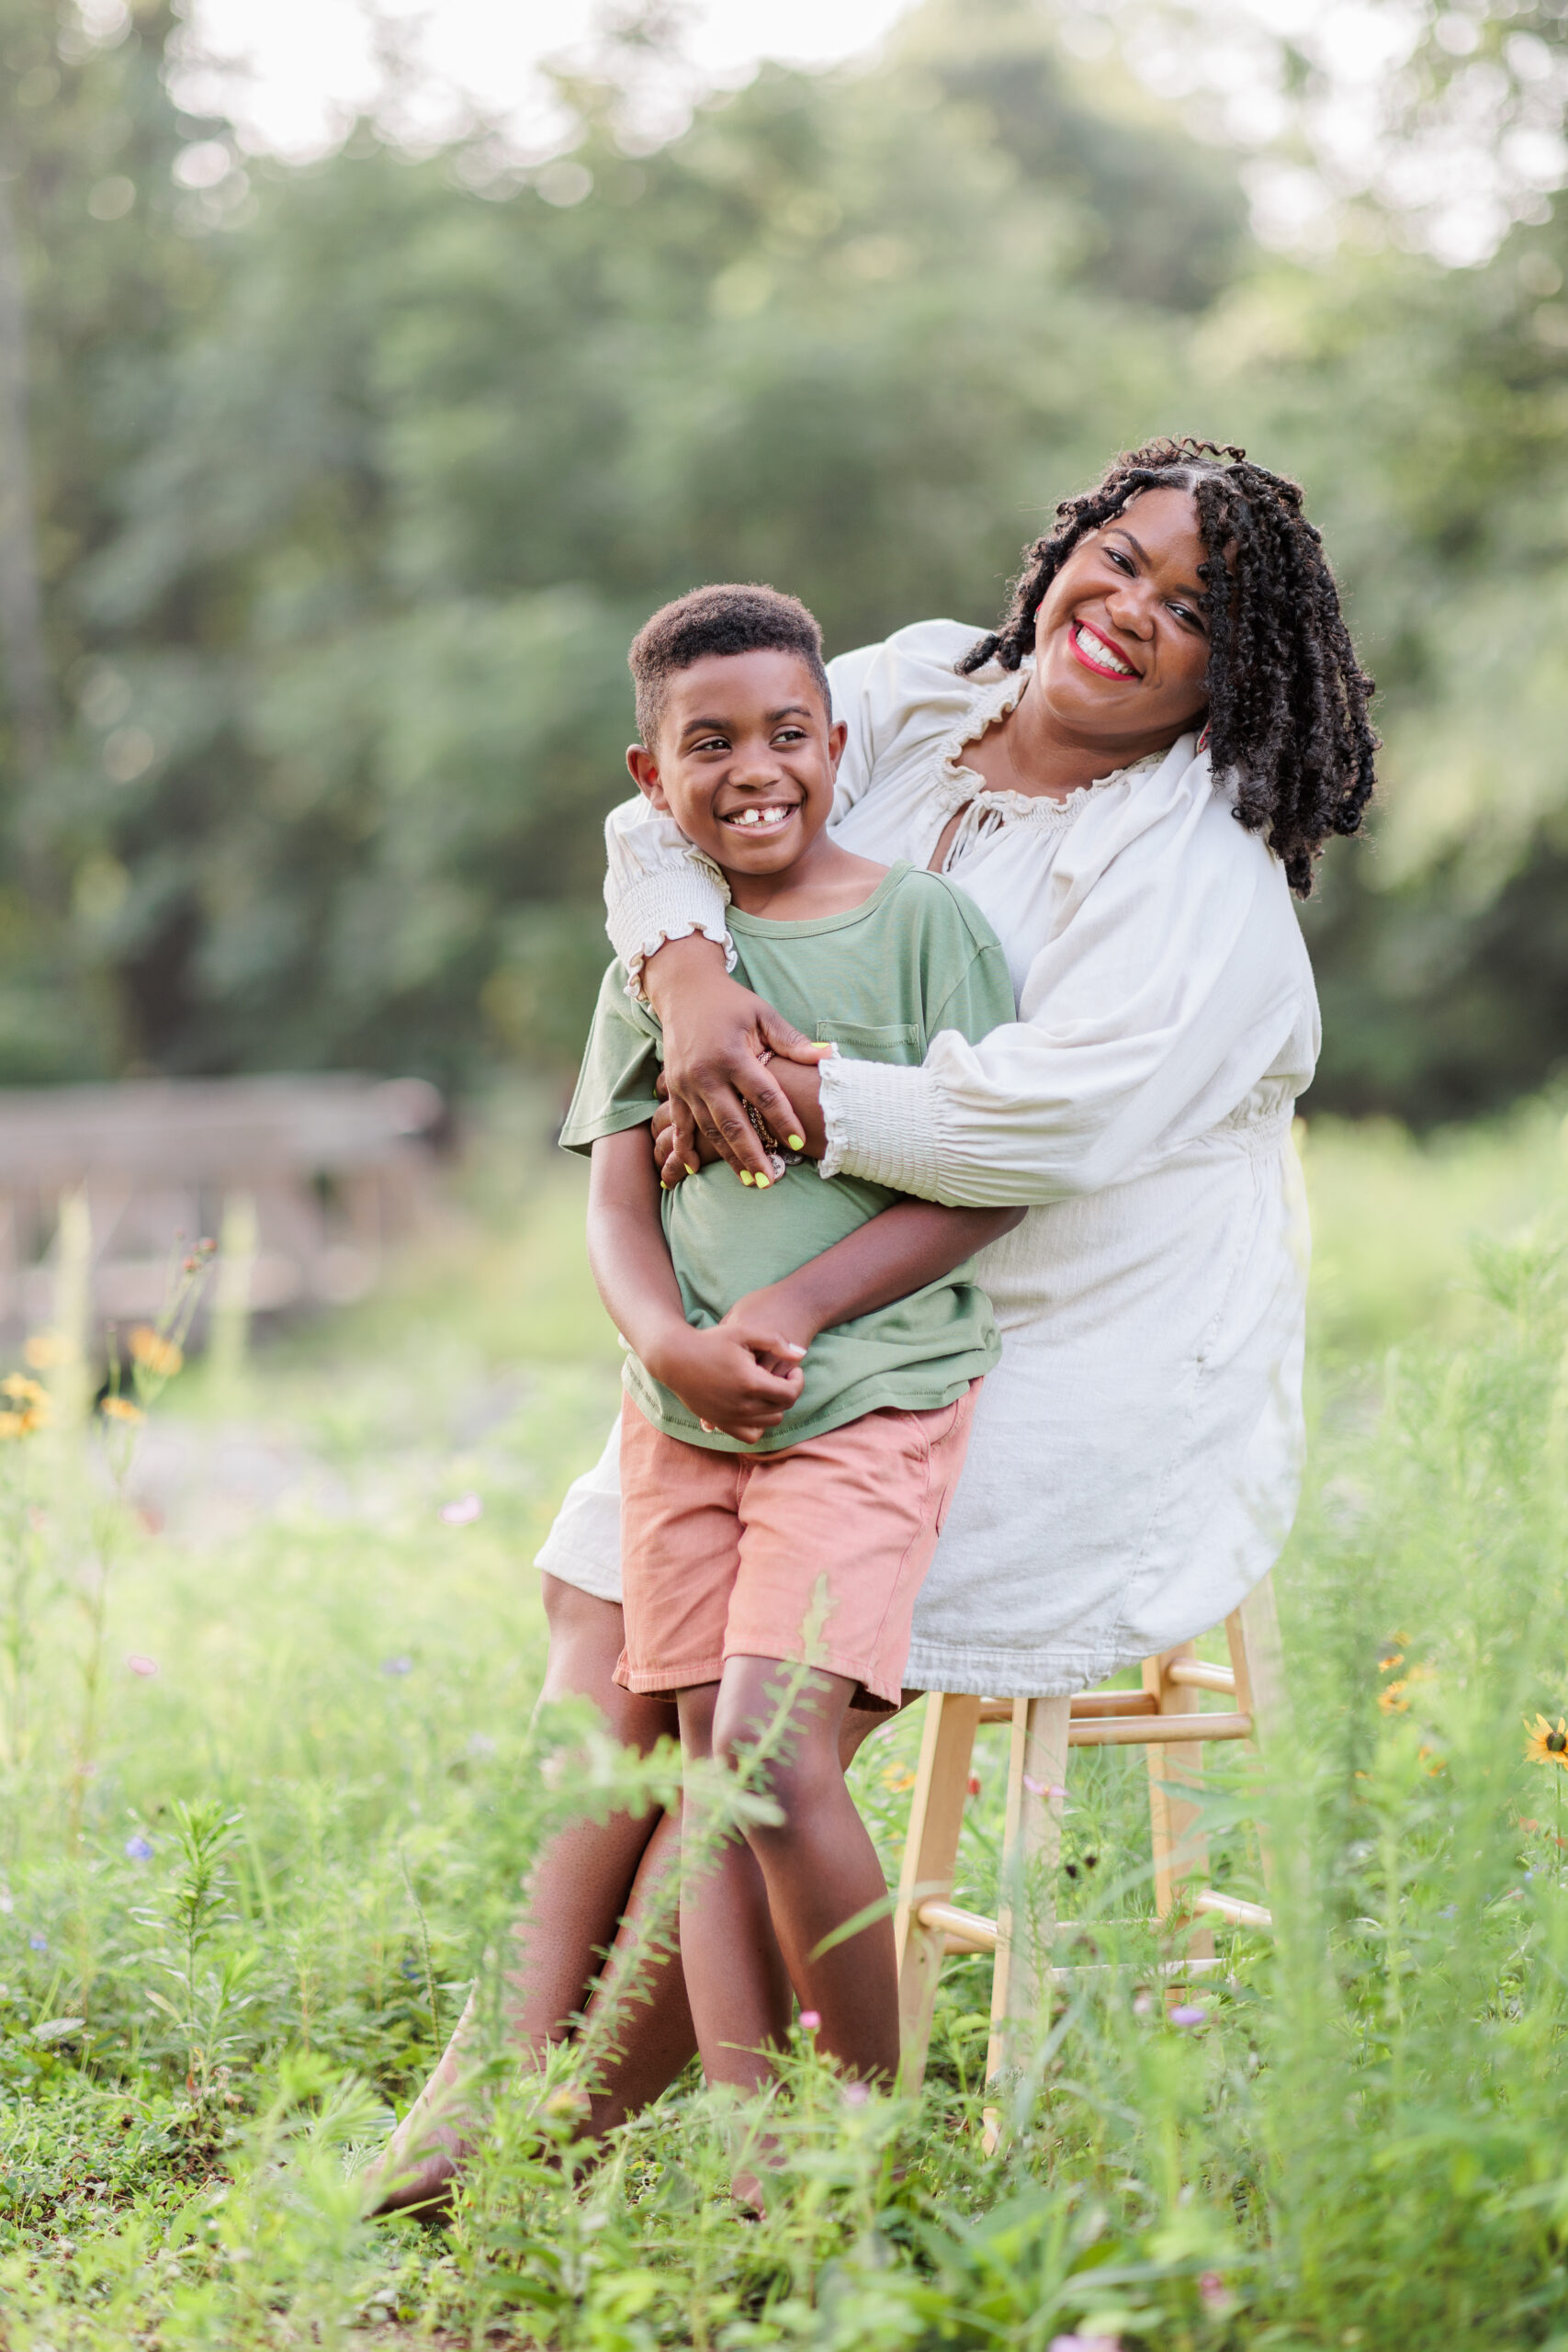 End of the Year: Christina Tundo Photography shares her 2023 Wrap-Up as a lifestyle Maryland and DMV family photographer